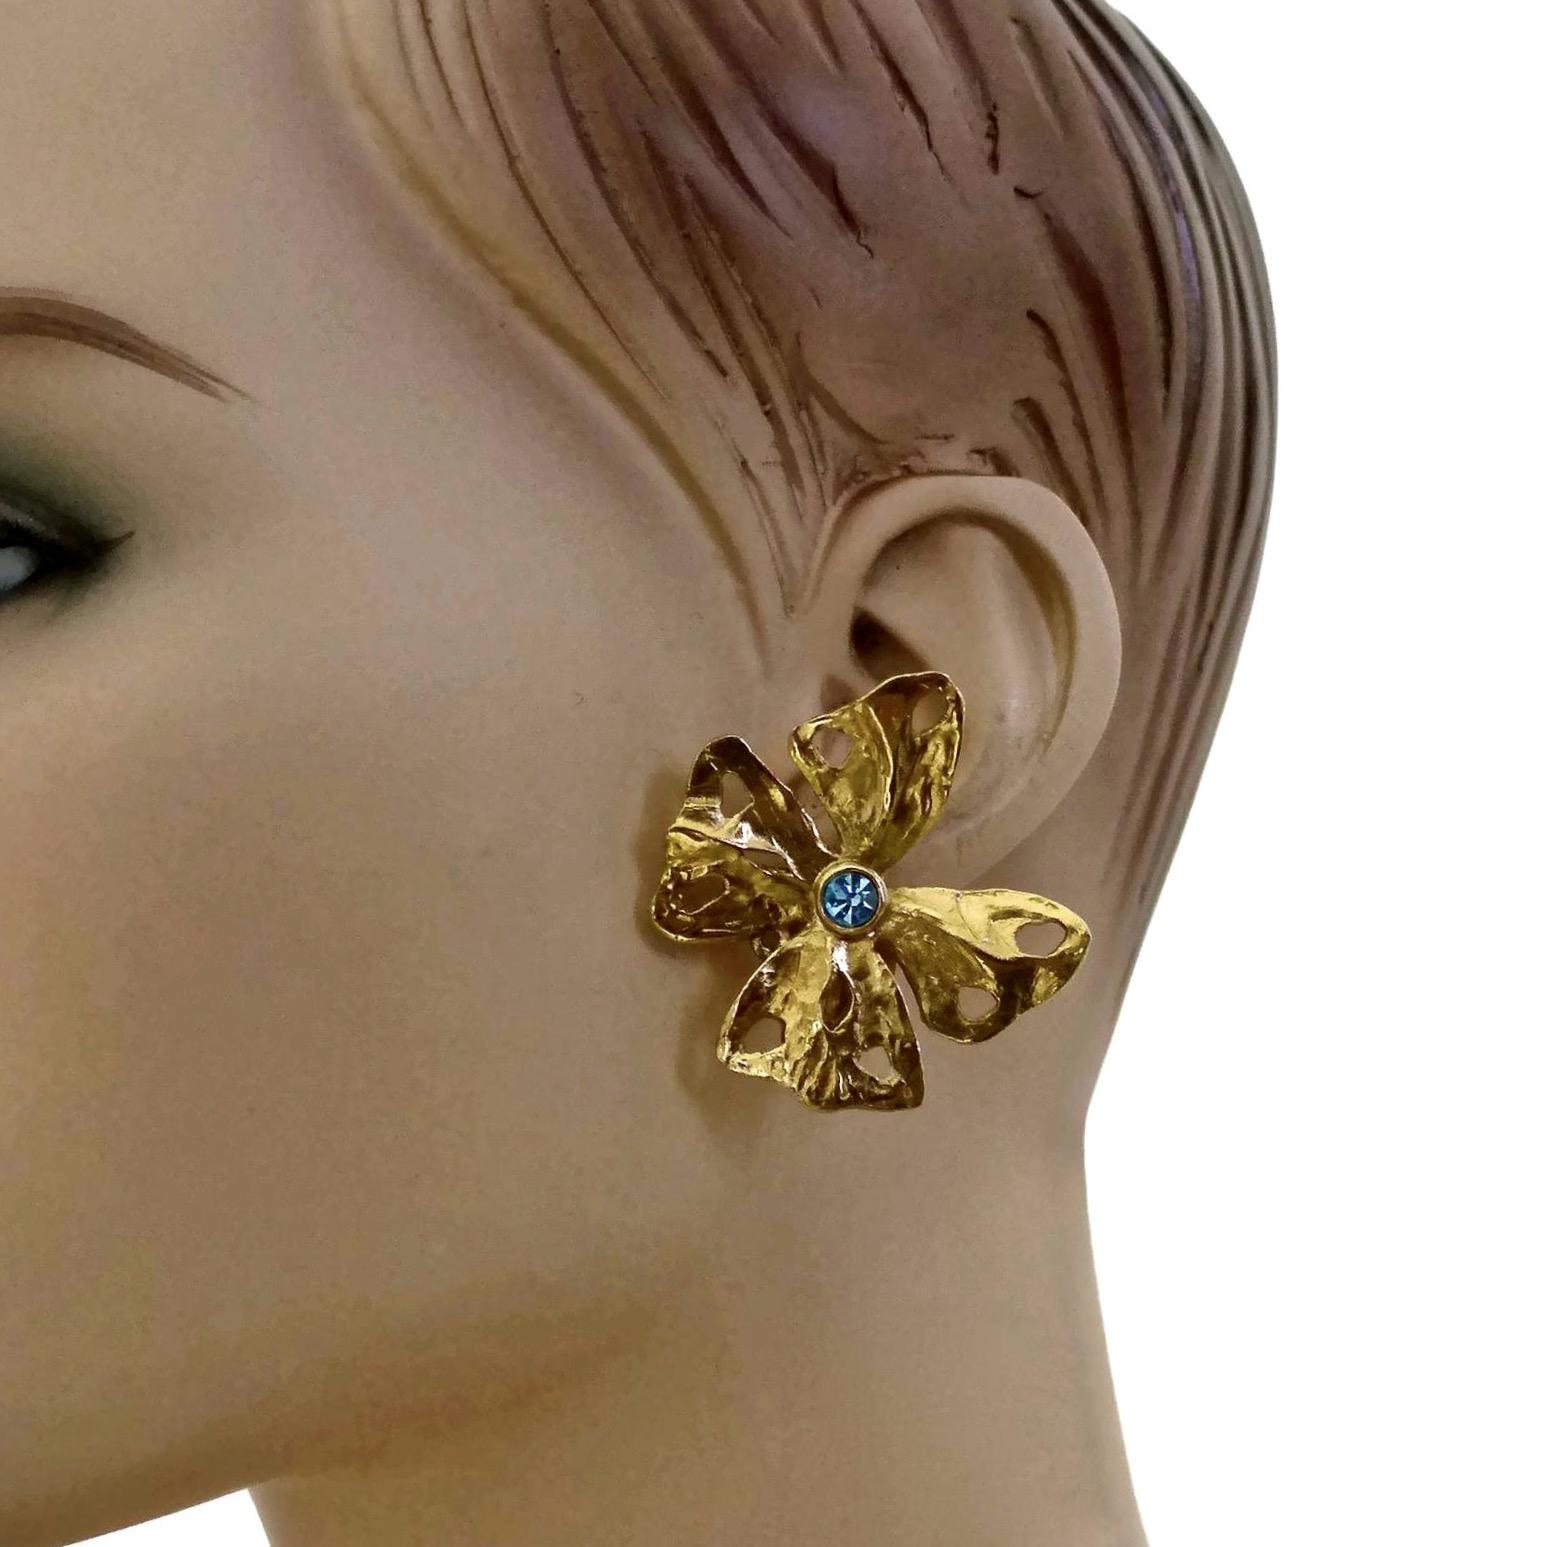 Vintage YSL Yves Saint Laurent by Robert Goossens Butterfly Rhinestone Earrings

Measurements:
Height: 1.65 inches (4.2 cm)
Width: 1.69 inches (4.3 cm)
Weight: 13 grams

Features:
- 100% Authentic YVES SAINT LAURENT by Robert Goossens.
- Metal gilt